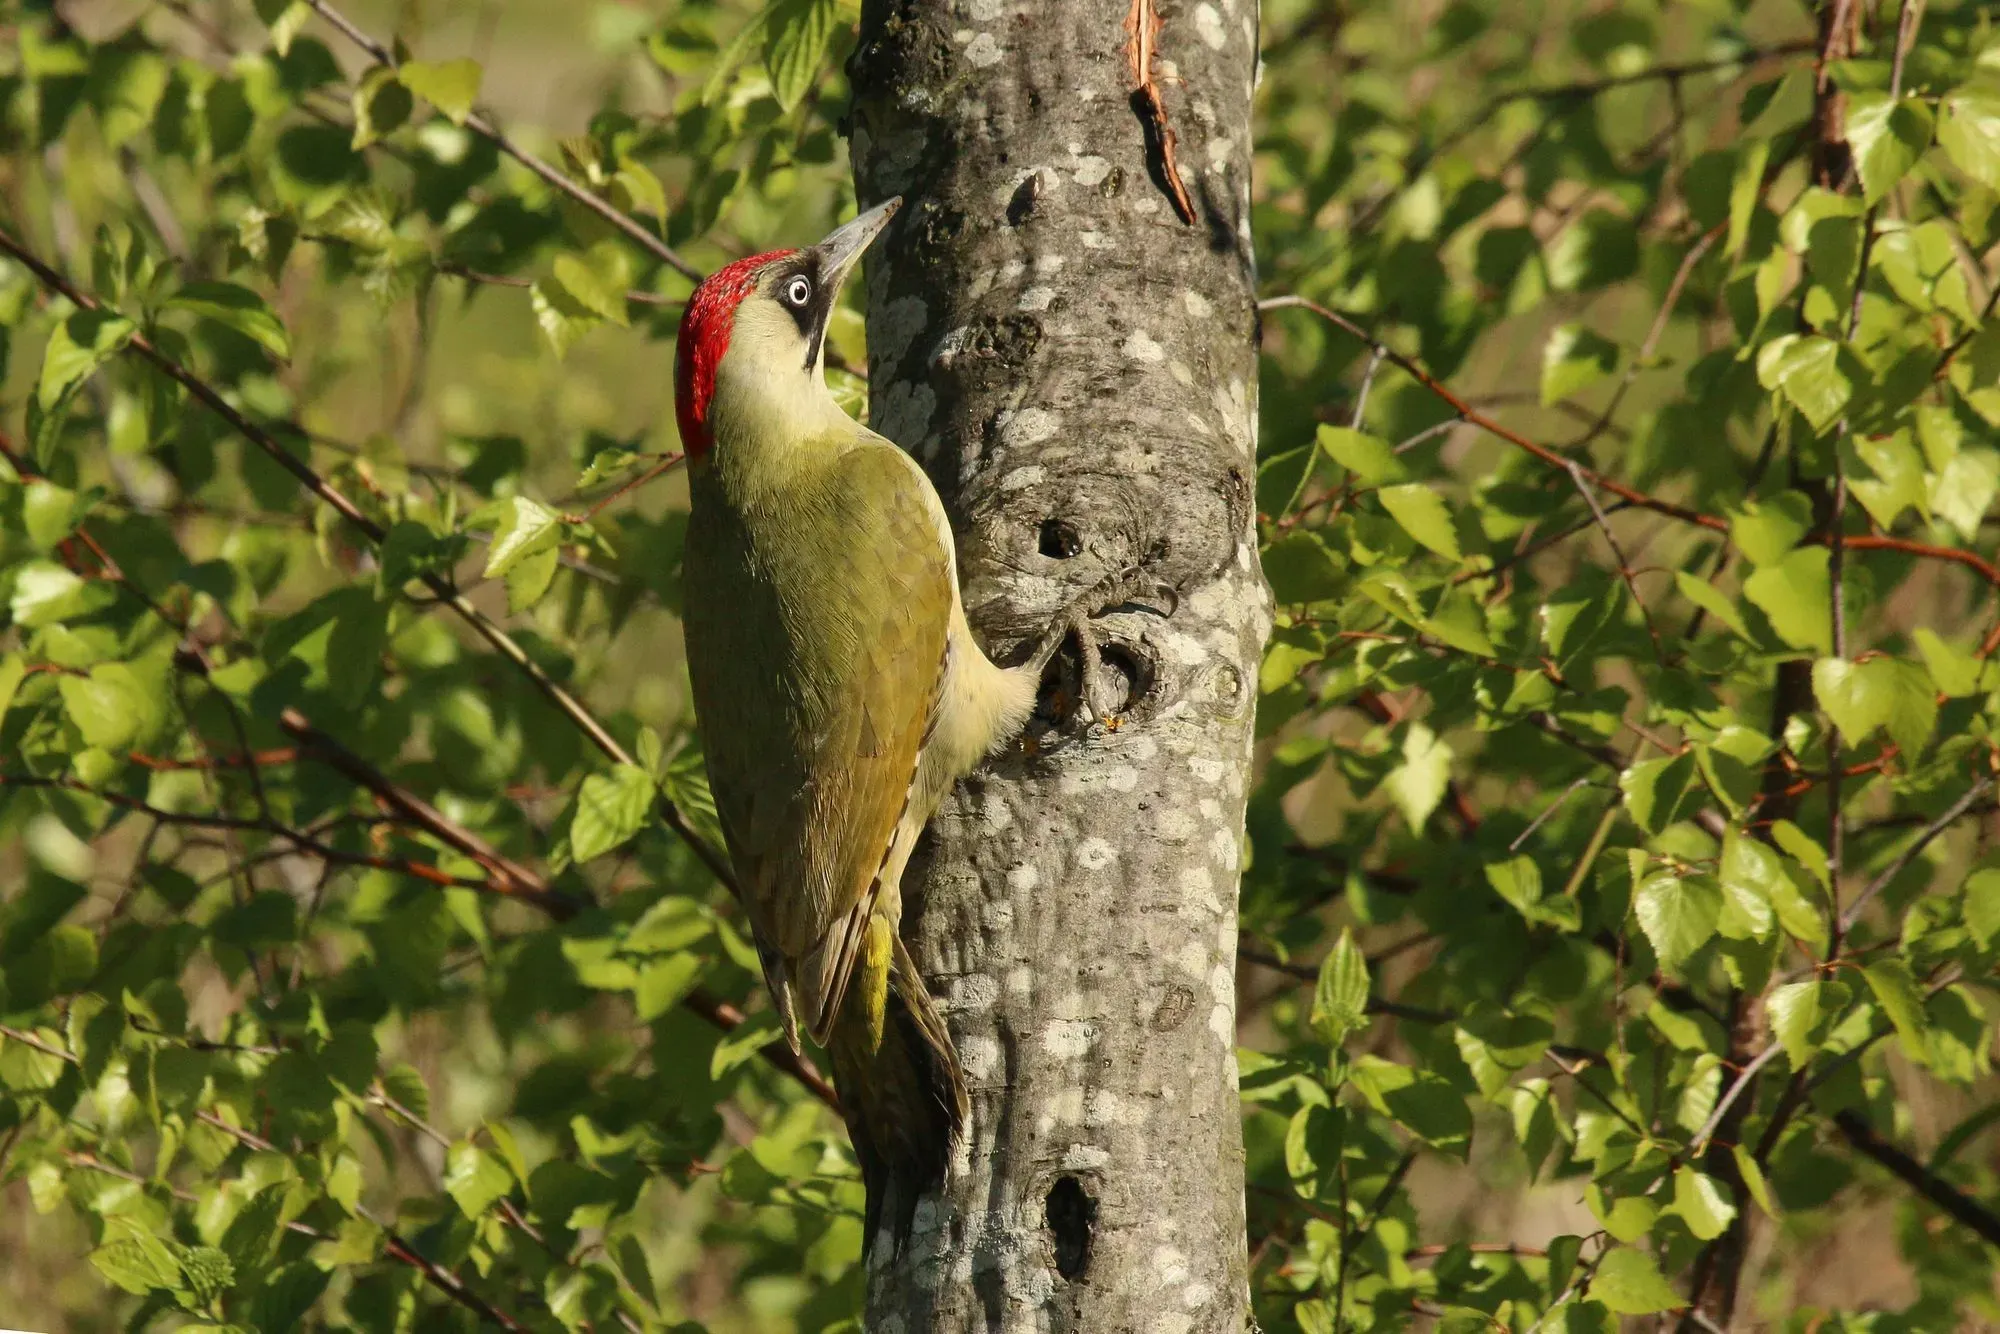 The plumage and bill of this woodpecker are some of its identifying features.